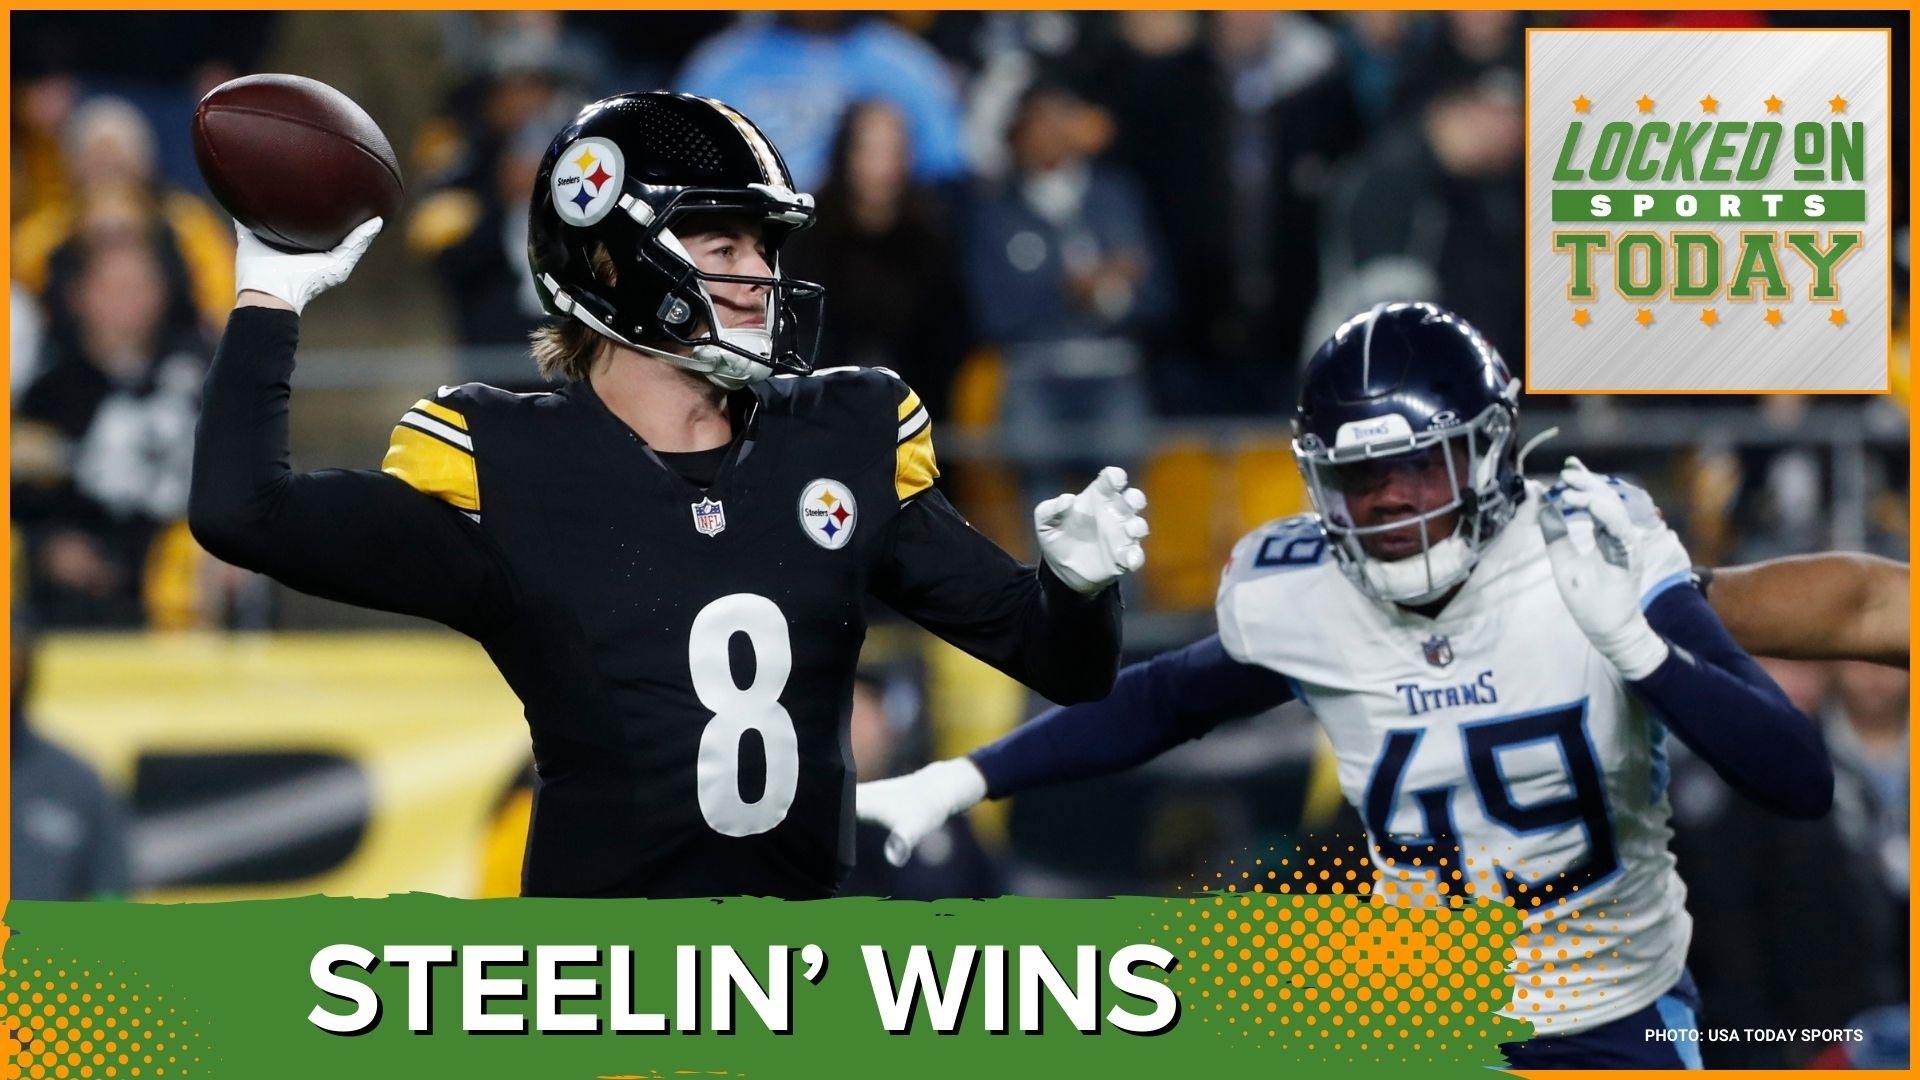 Discussing the day's top sports stories from the Steelers on the rise to the Heat starting off the season lukewarm to previewing the Dolphins vs. Chiefs in Germany.